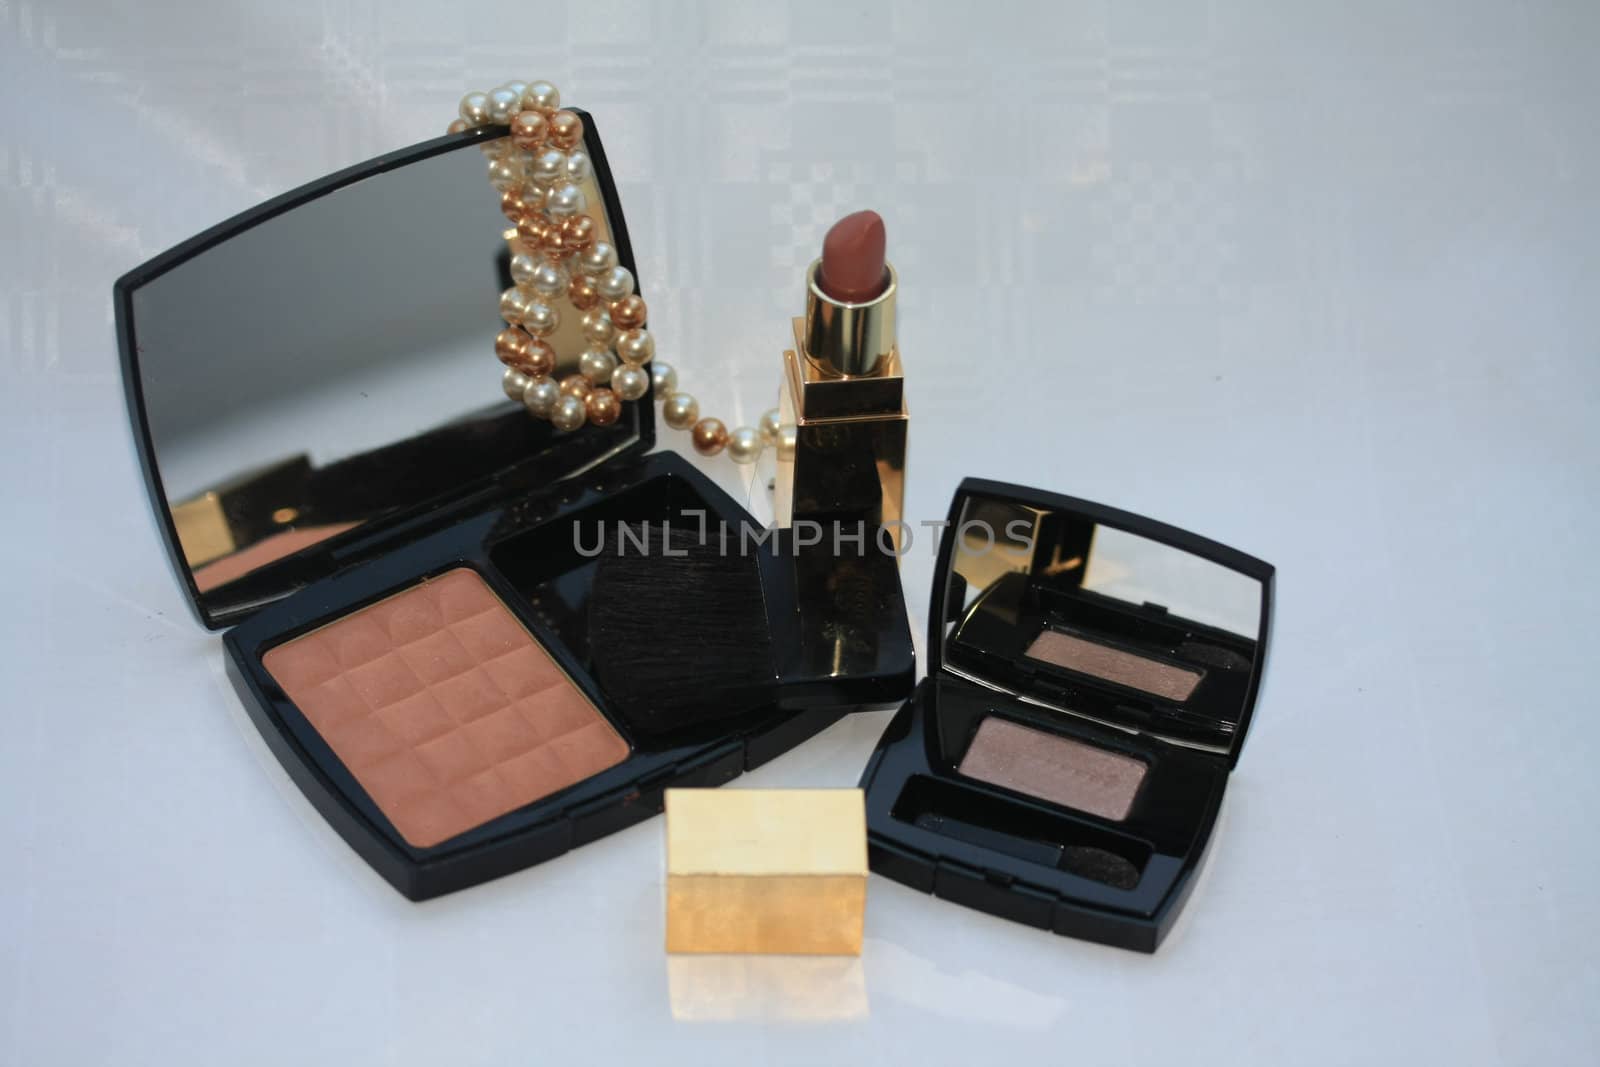 Luxury blusher, lipstick and an eyeshadow palet